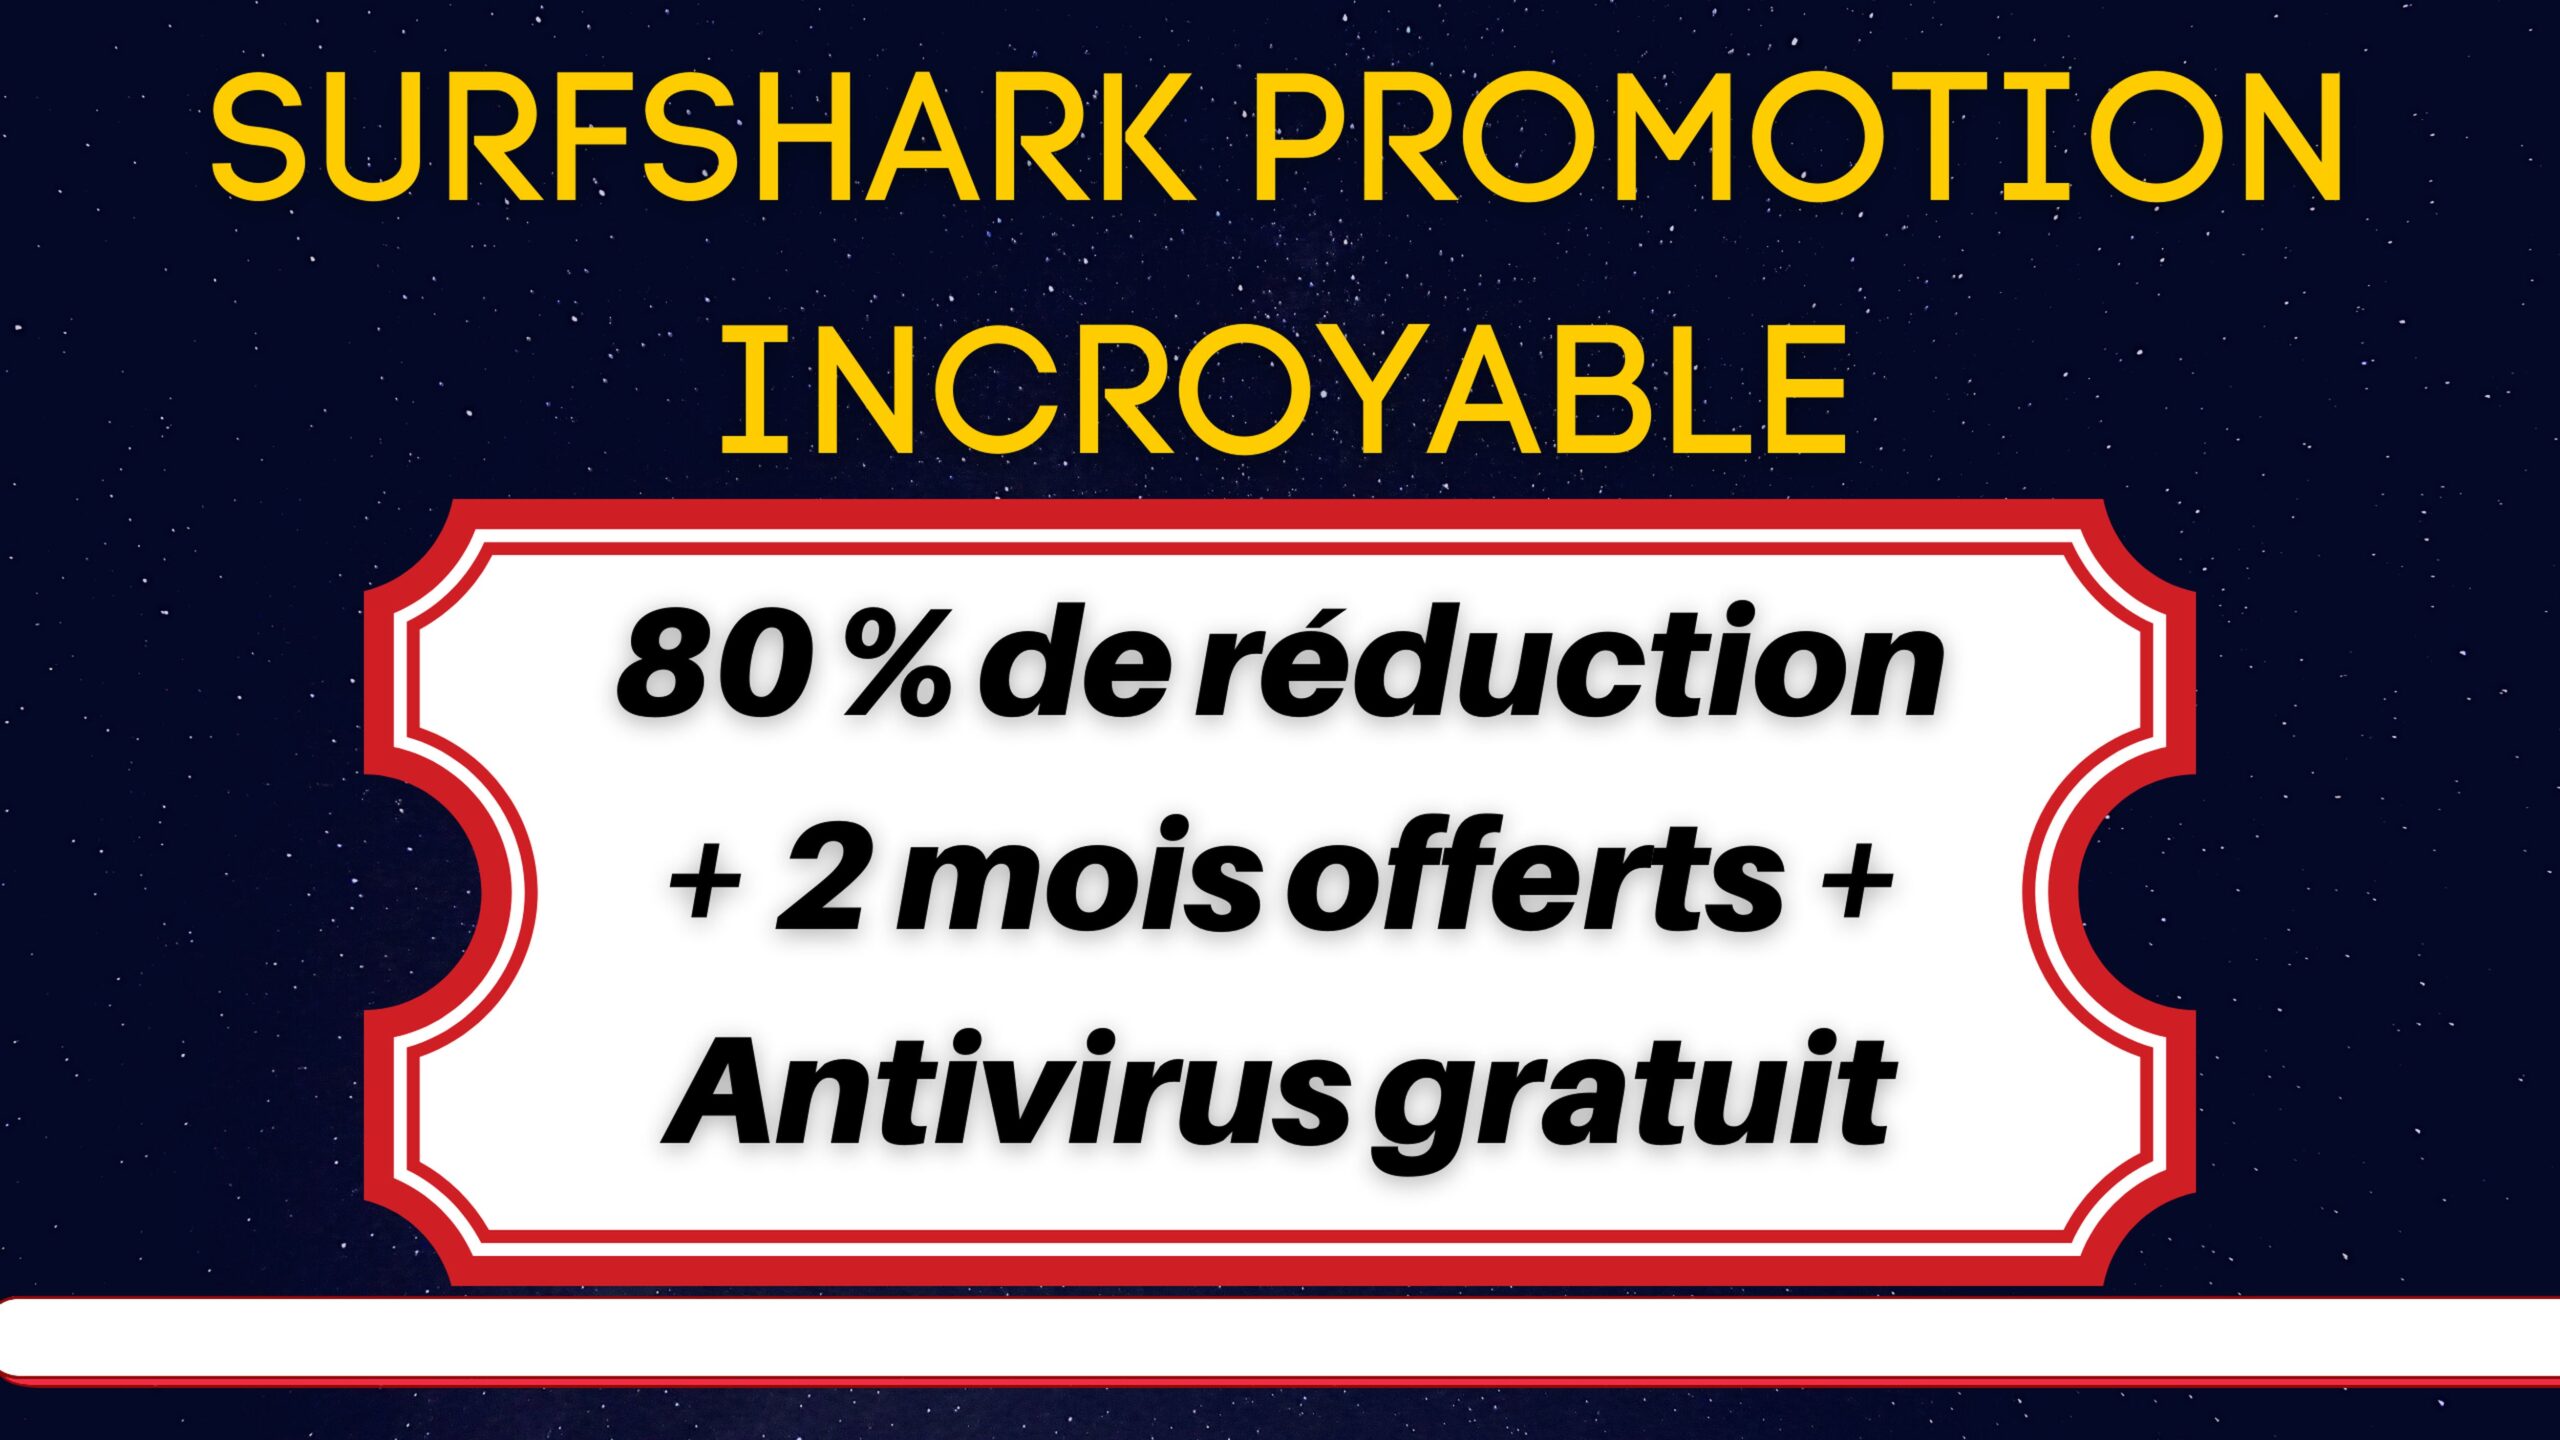 Code Promo SURFSHARK – Promotion exclusive incroyable !